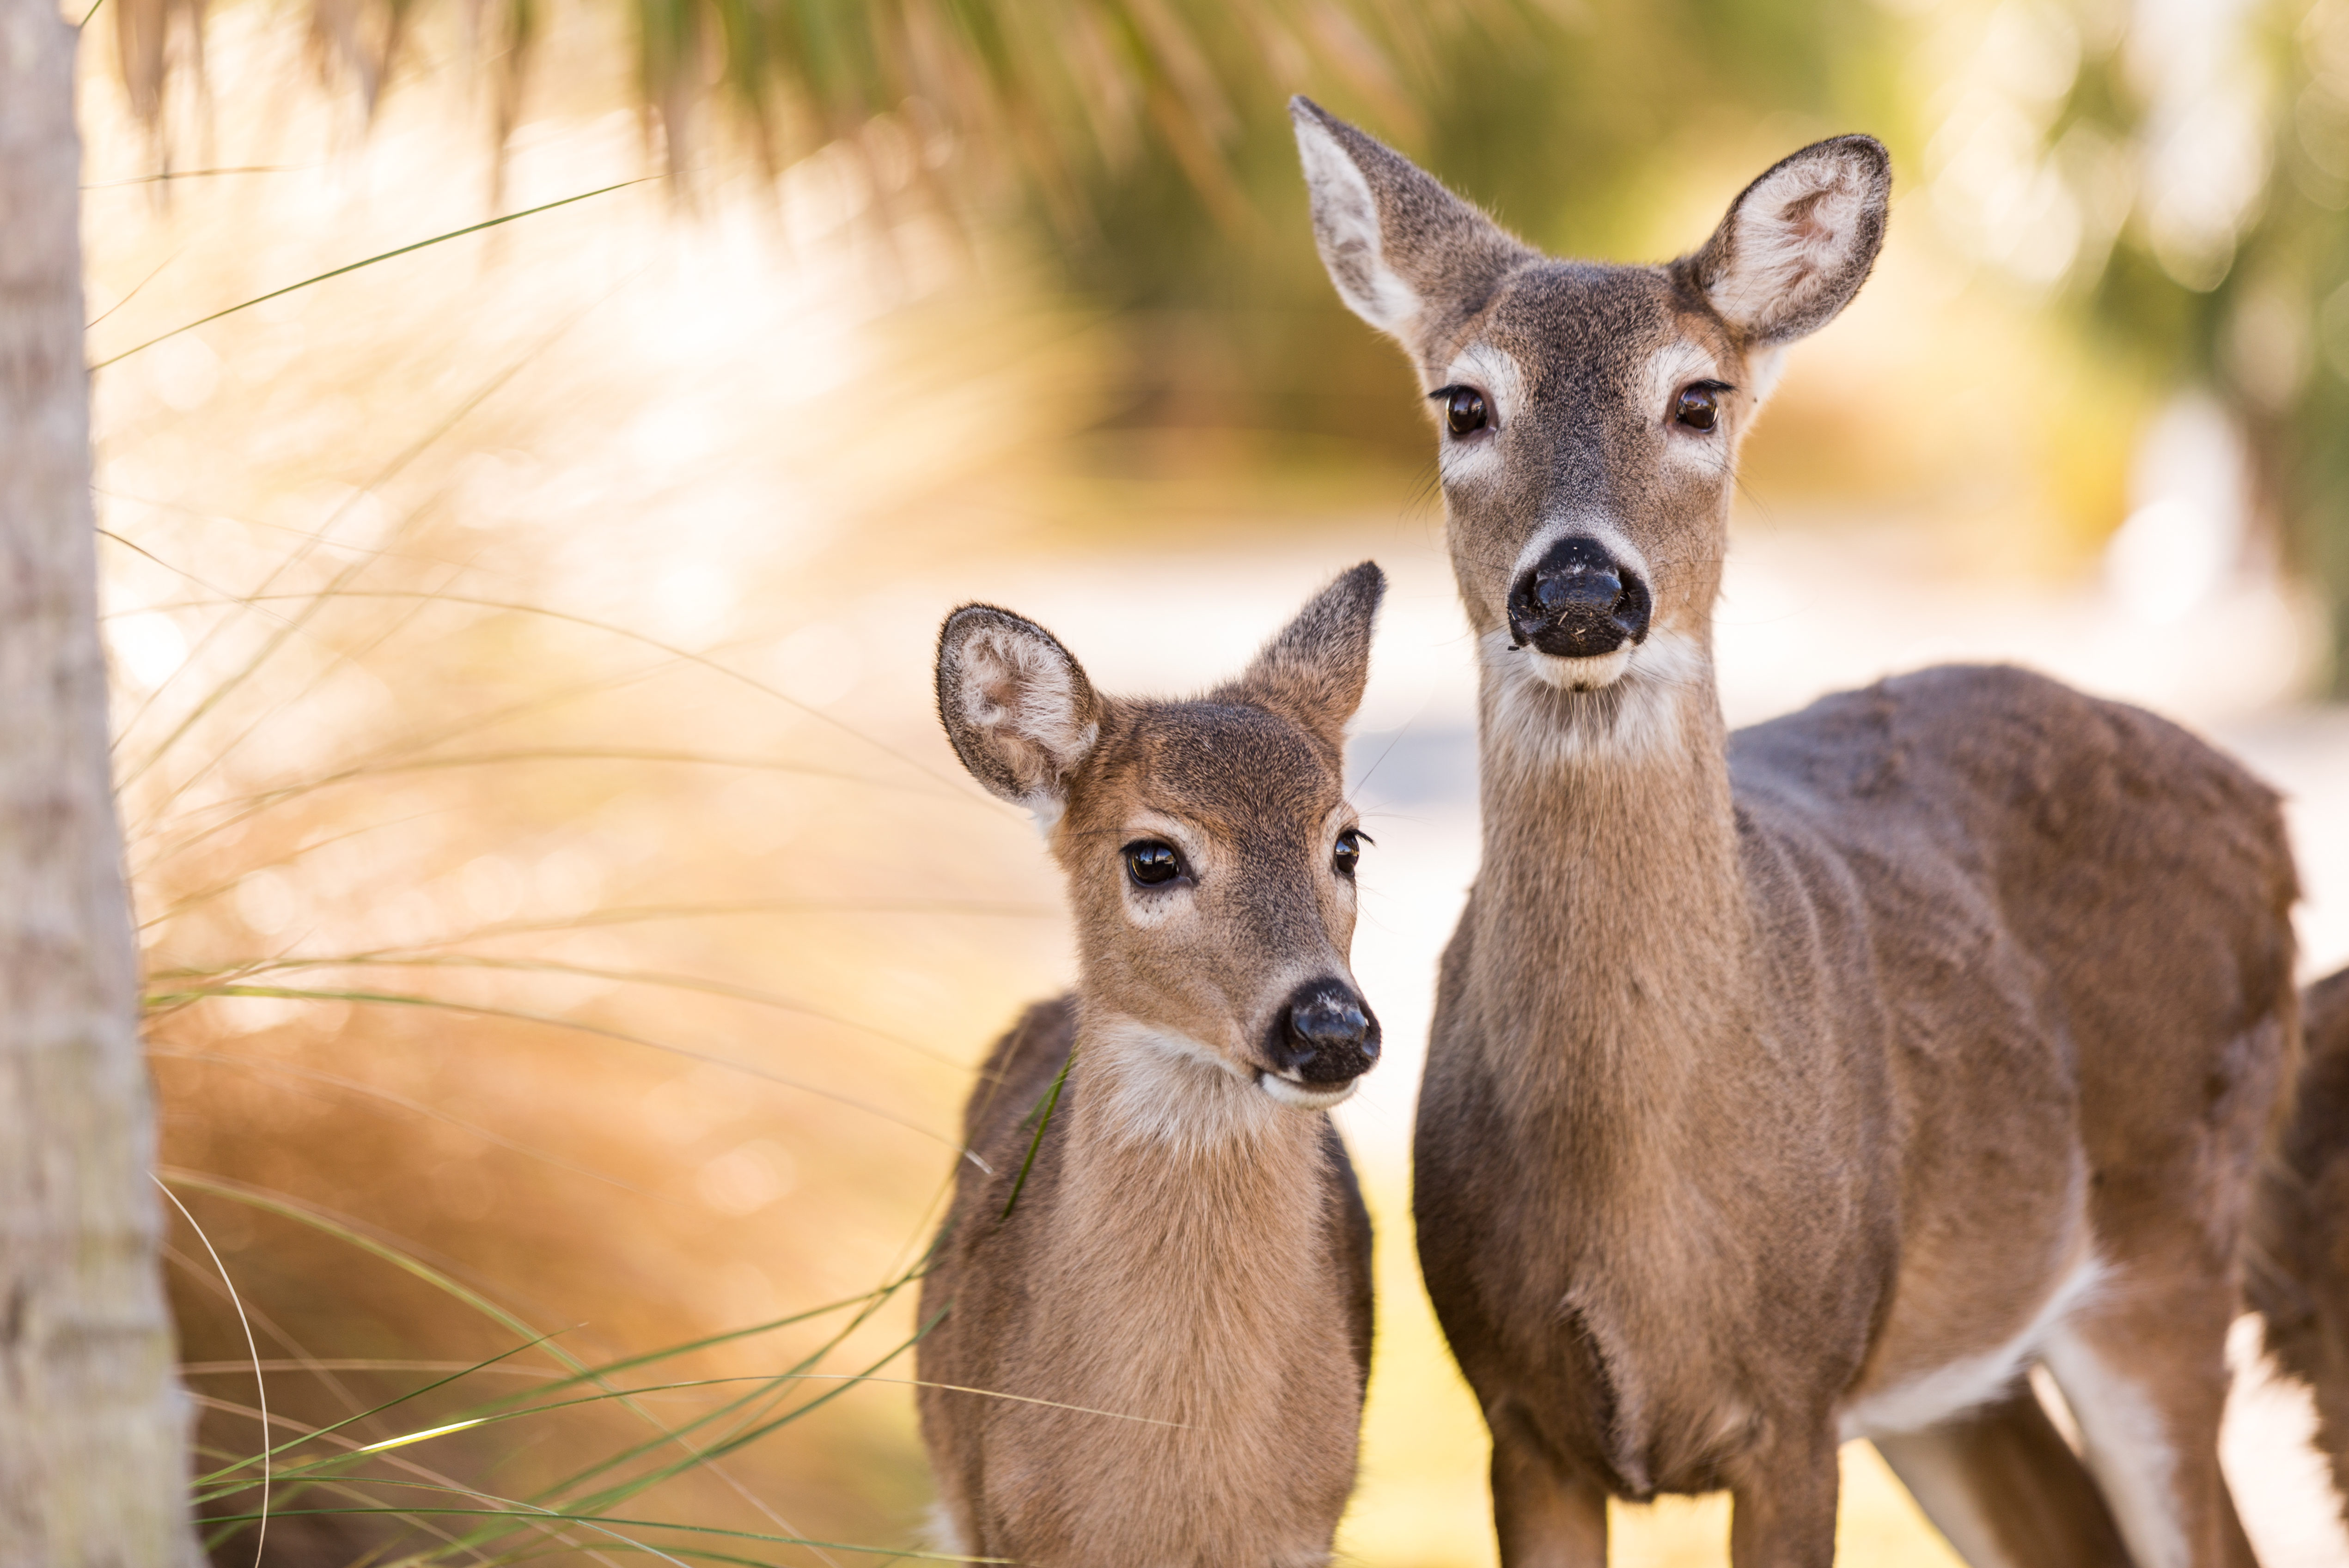 EPA gives thumbs up on vaccine to manage deer populations humanely ...